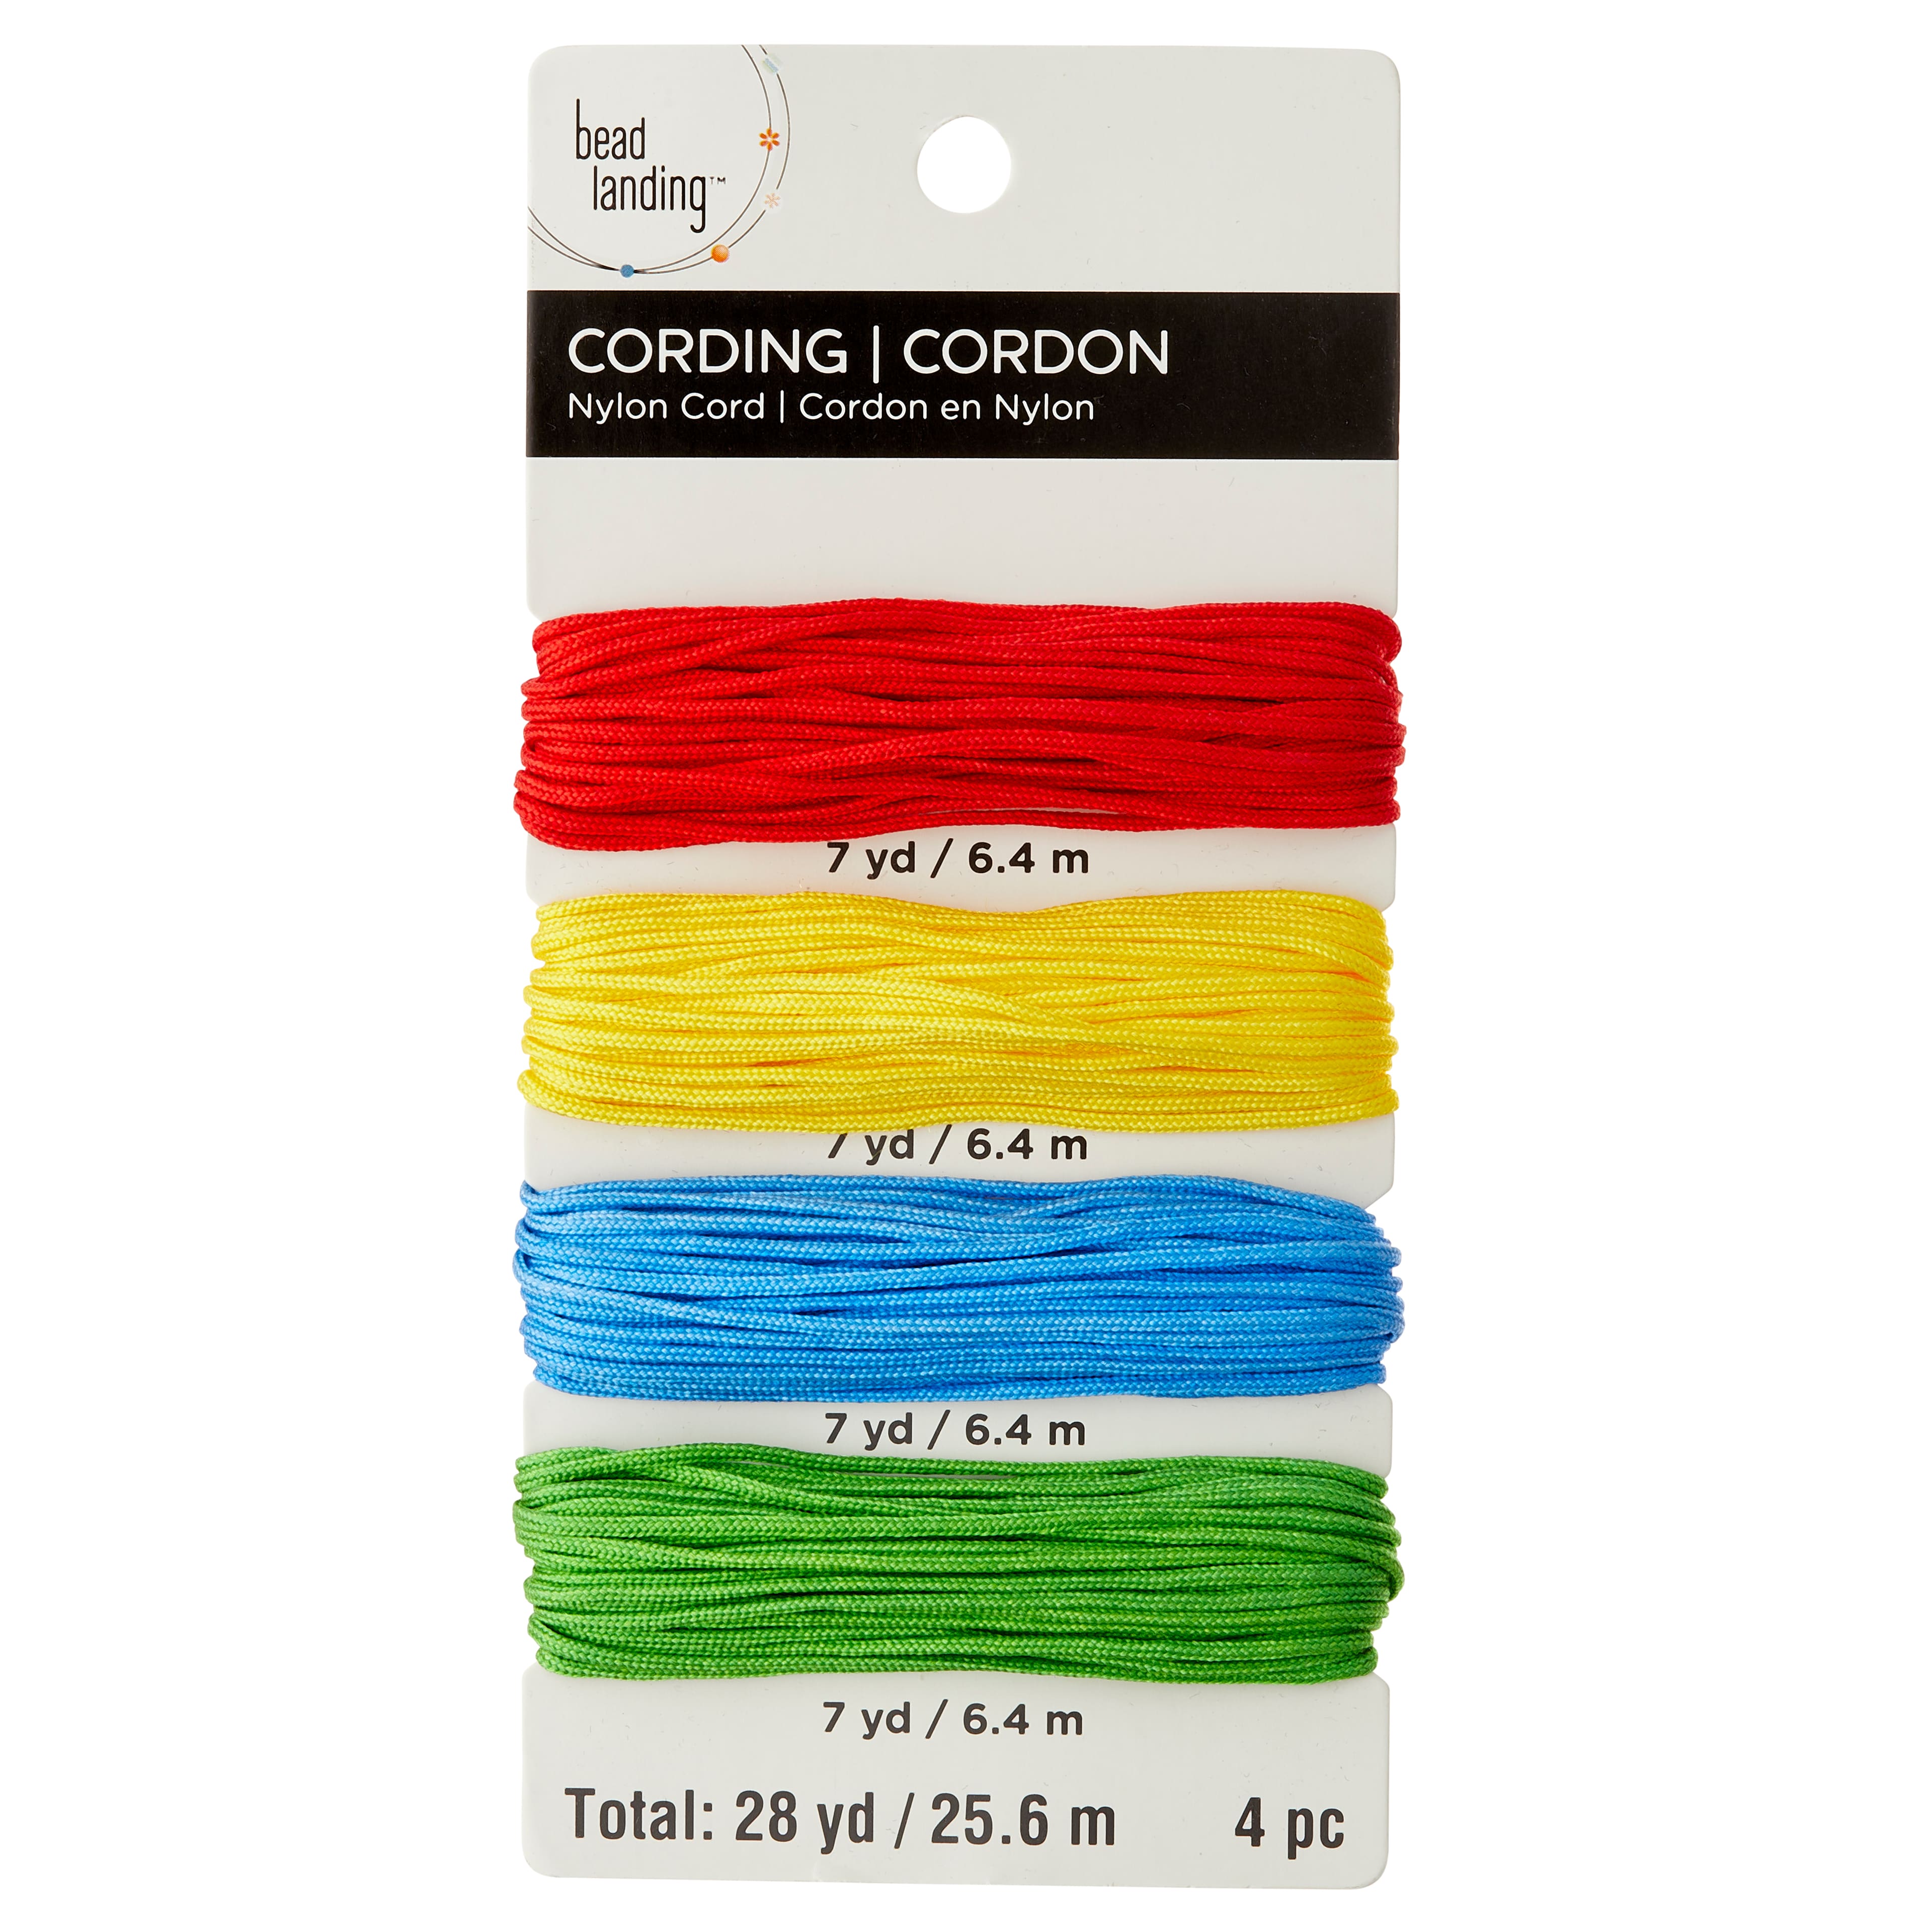 Pipe Filler Cord Cotton Wrights 6/32 10 Yards 9.1m NEW IN PACKAGE